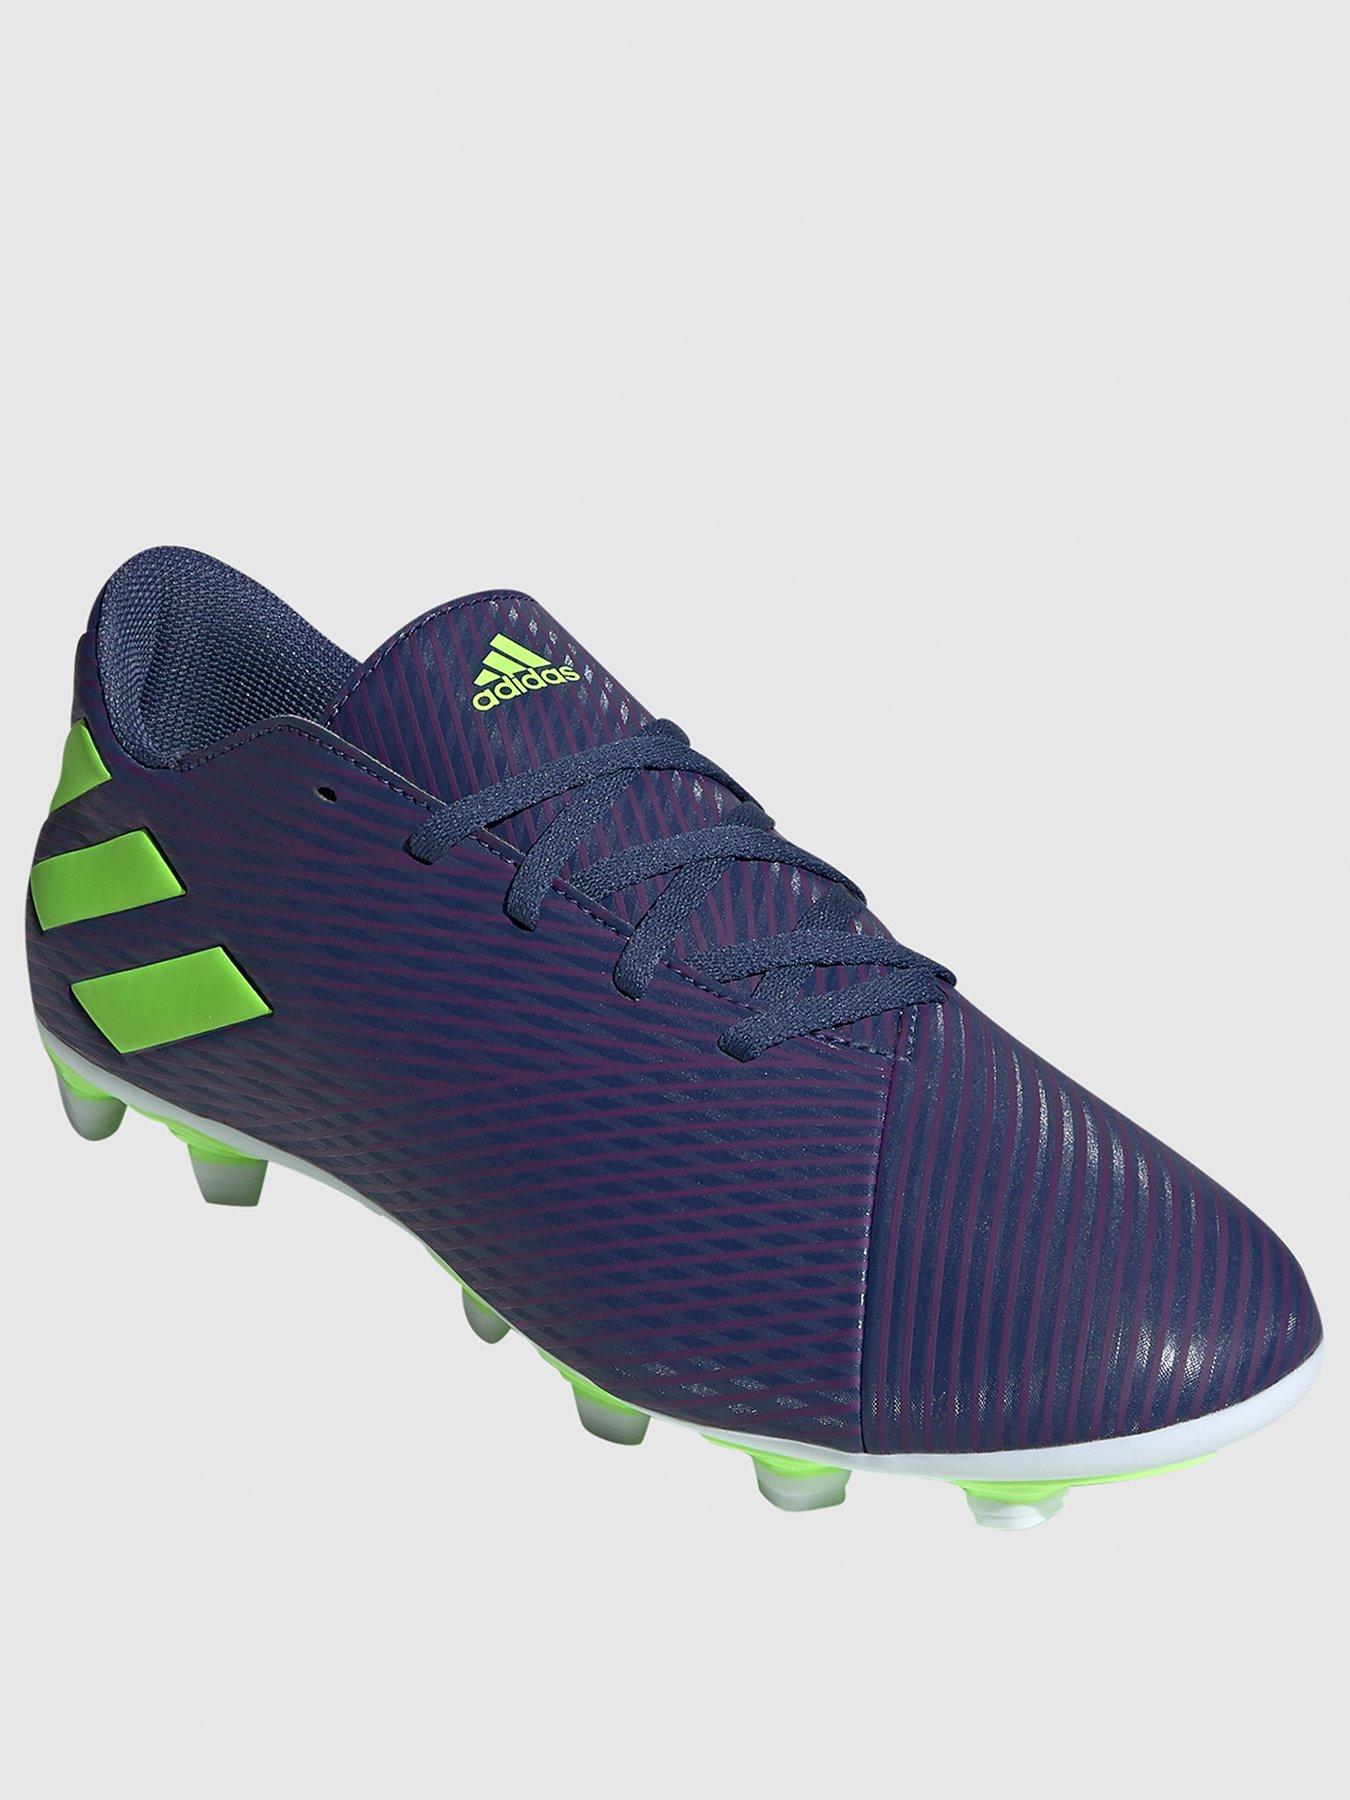 messi boots 219 price